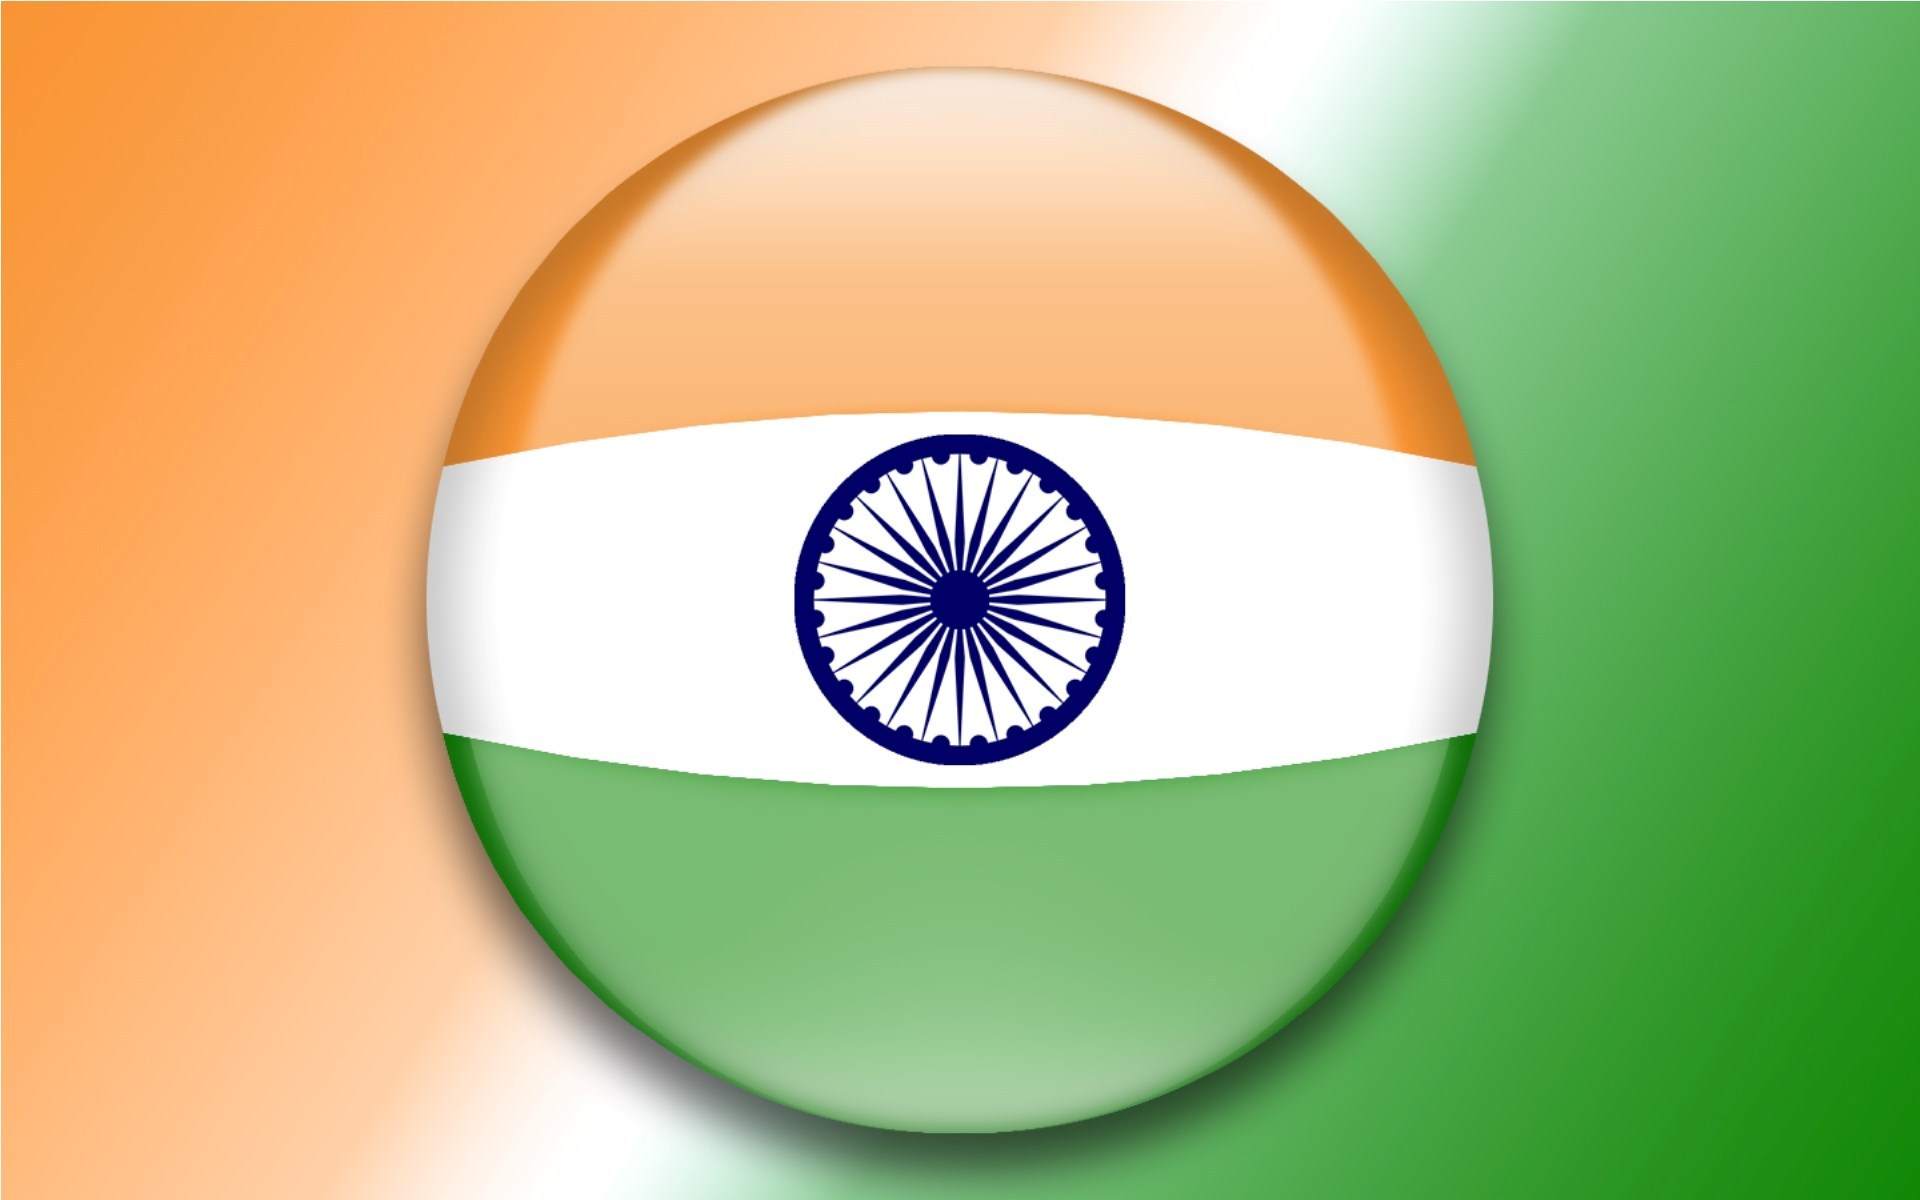 Indian National Flag in 3D Animated with Three Colors - HD Wallpapers ...